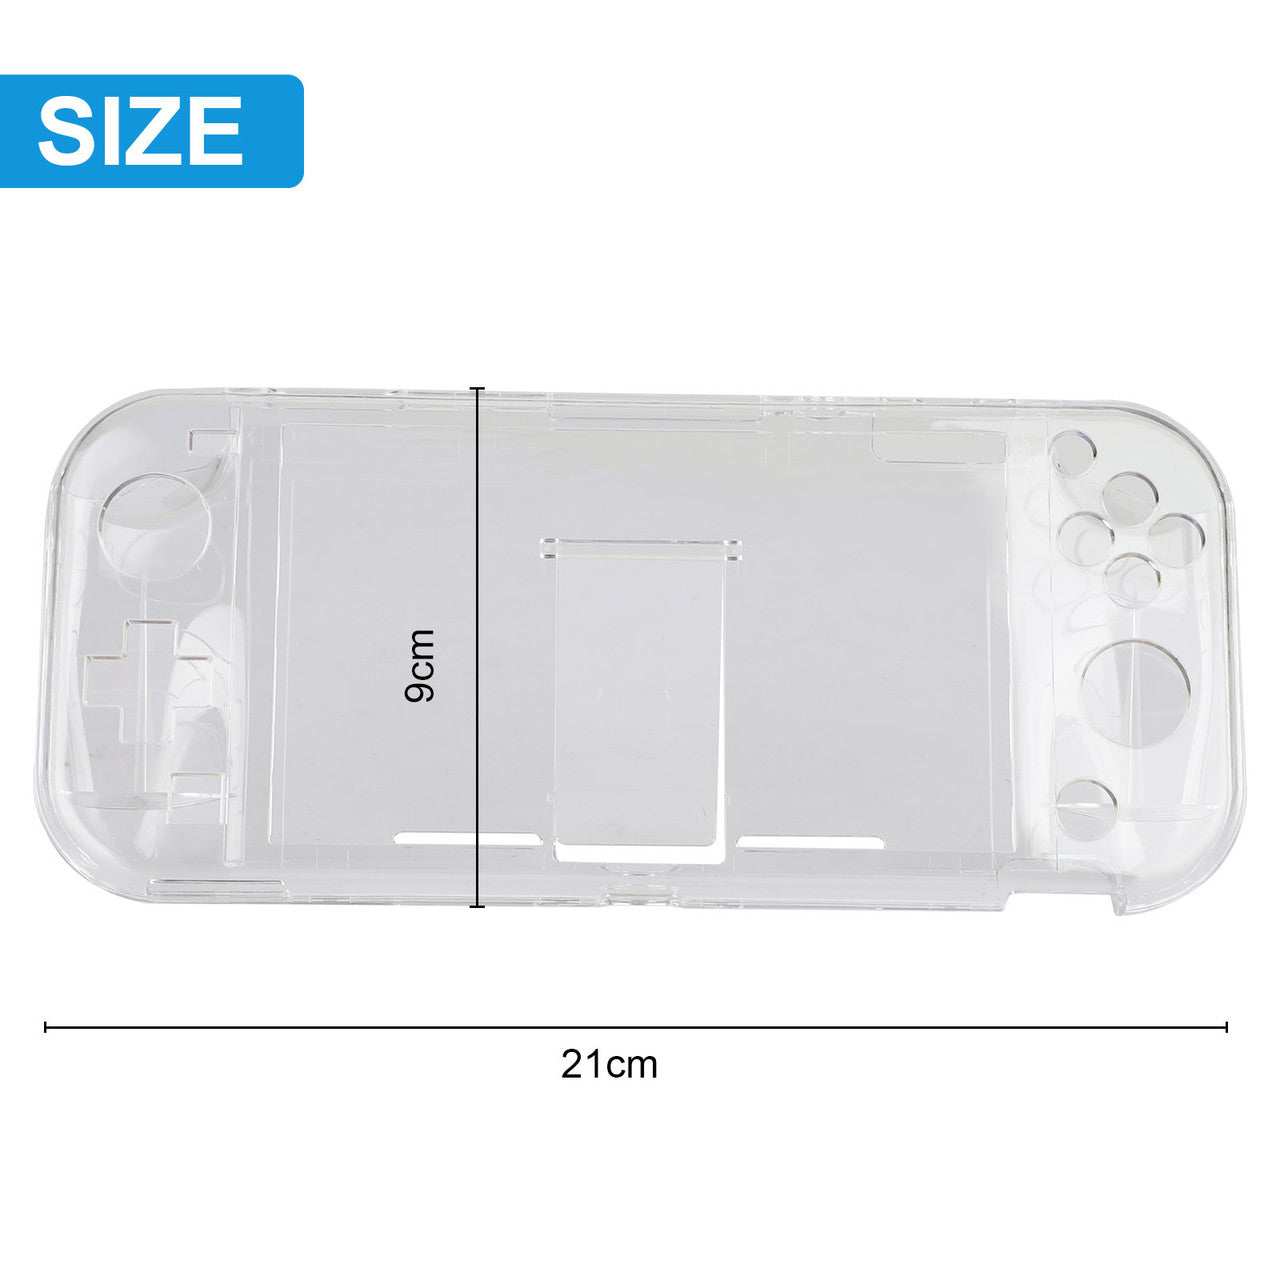 Case for Nintendo Switch Lite 2019, Transparent Clear Grip Cover Protective Accessories fit for Nintendo Switch Lite with Kickstand, 2x Tempered Glass Screen Protector and 6x Thumb Caps Included